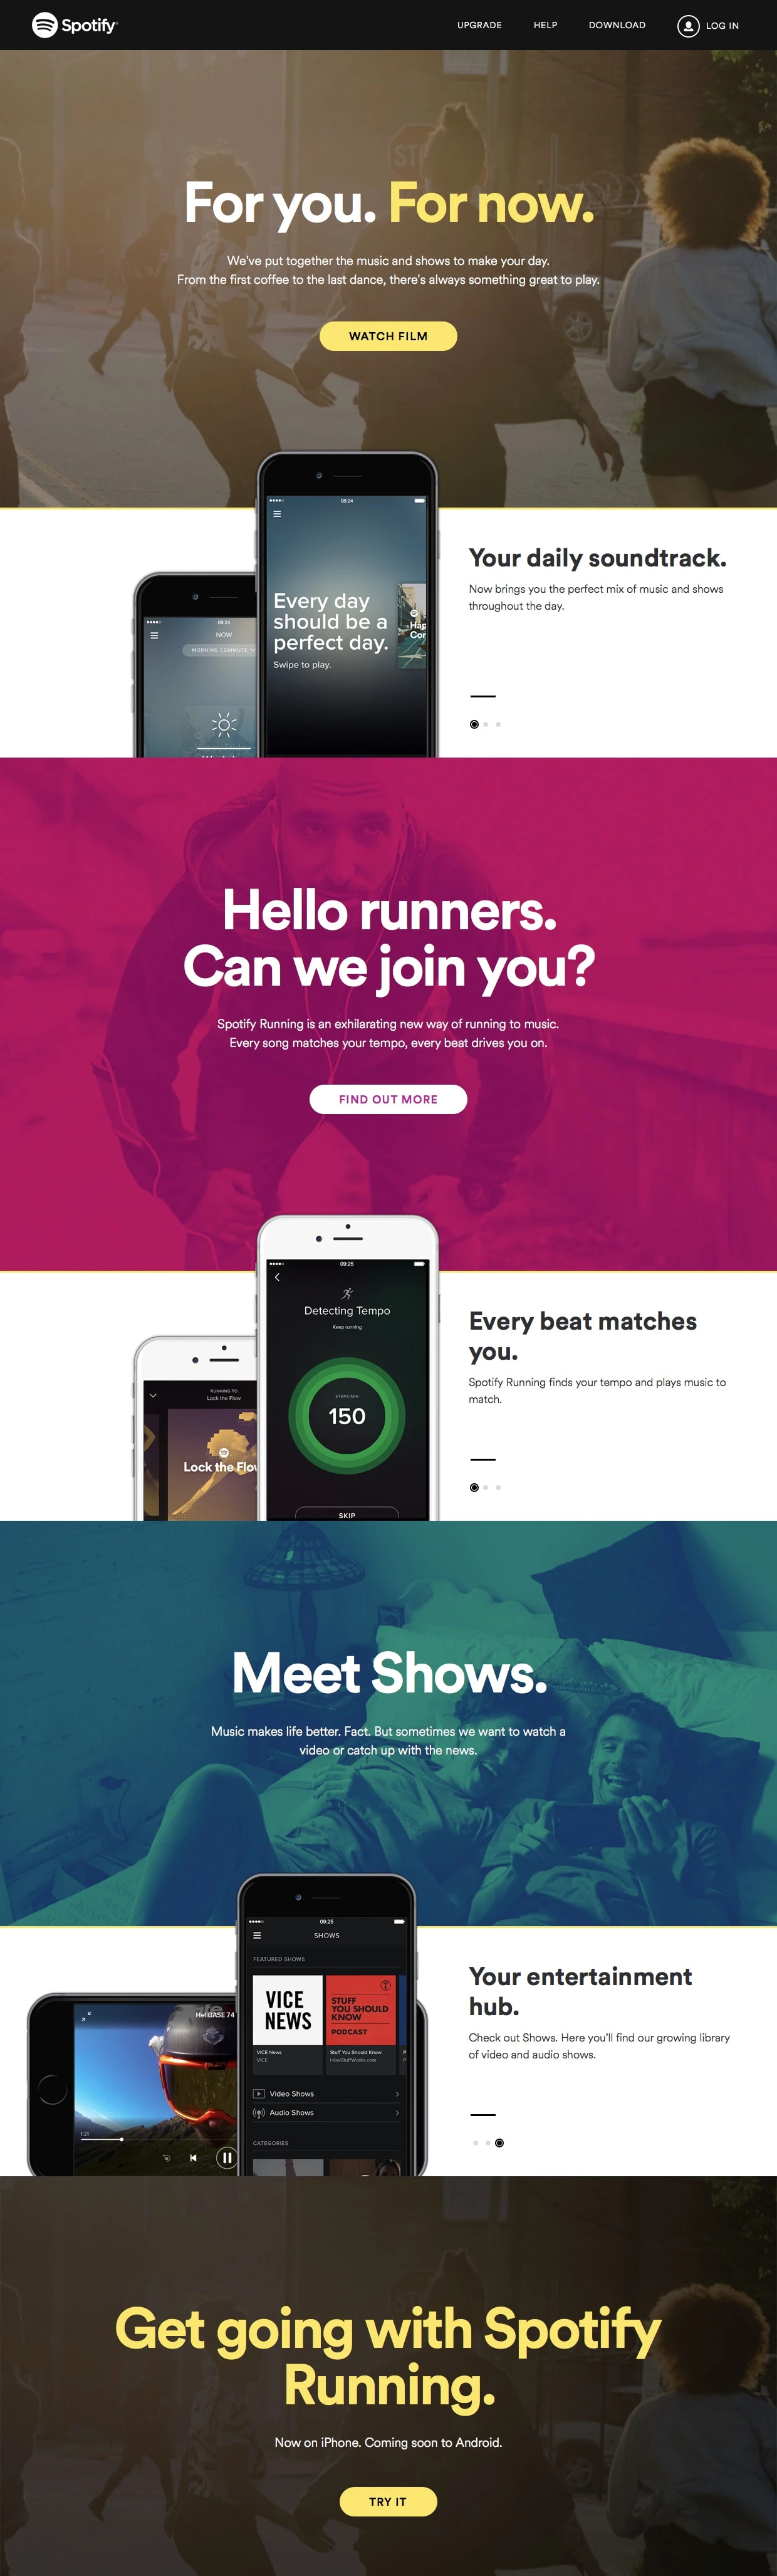 Now - Spotify Landing Page Example: Catch up with the news, watch a quick video, and get music that matches the beat of your run.